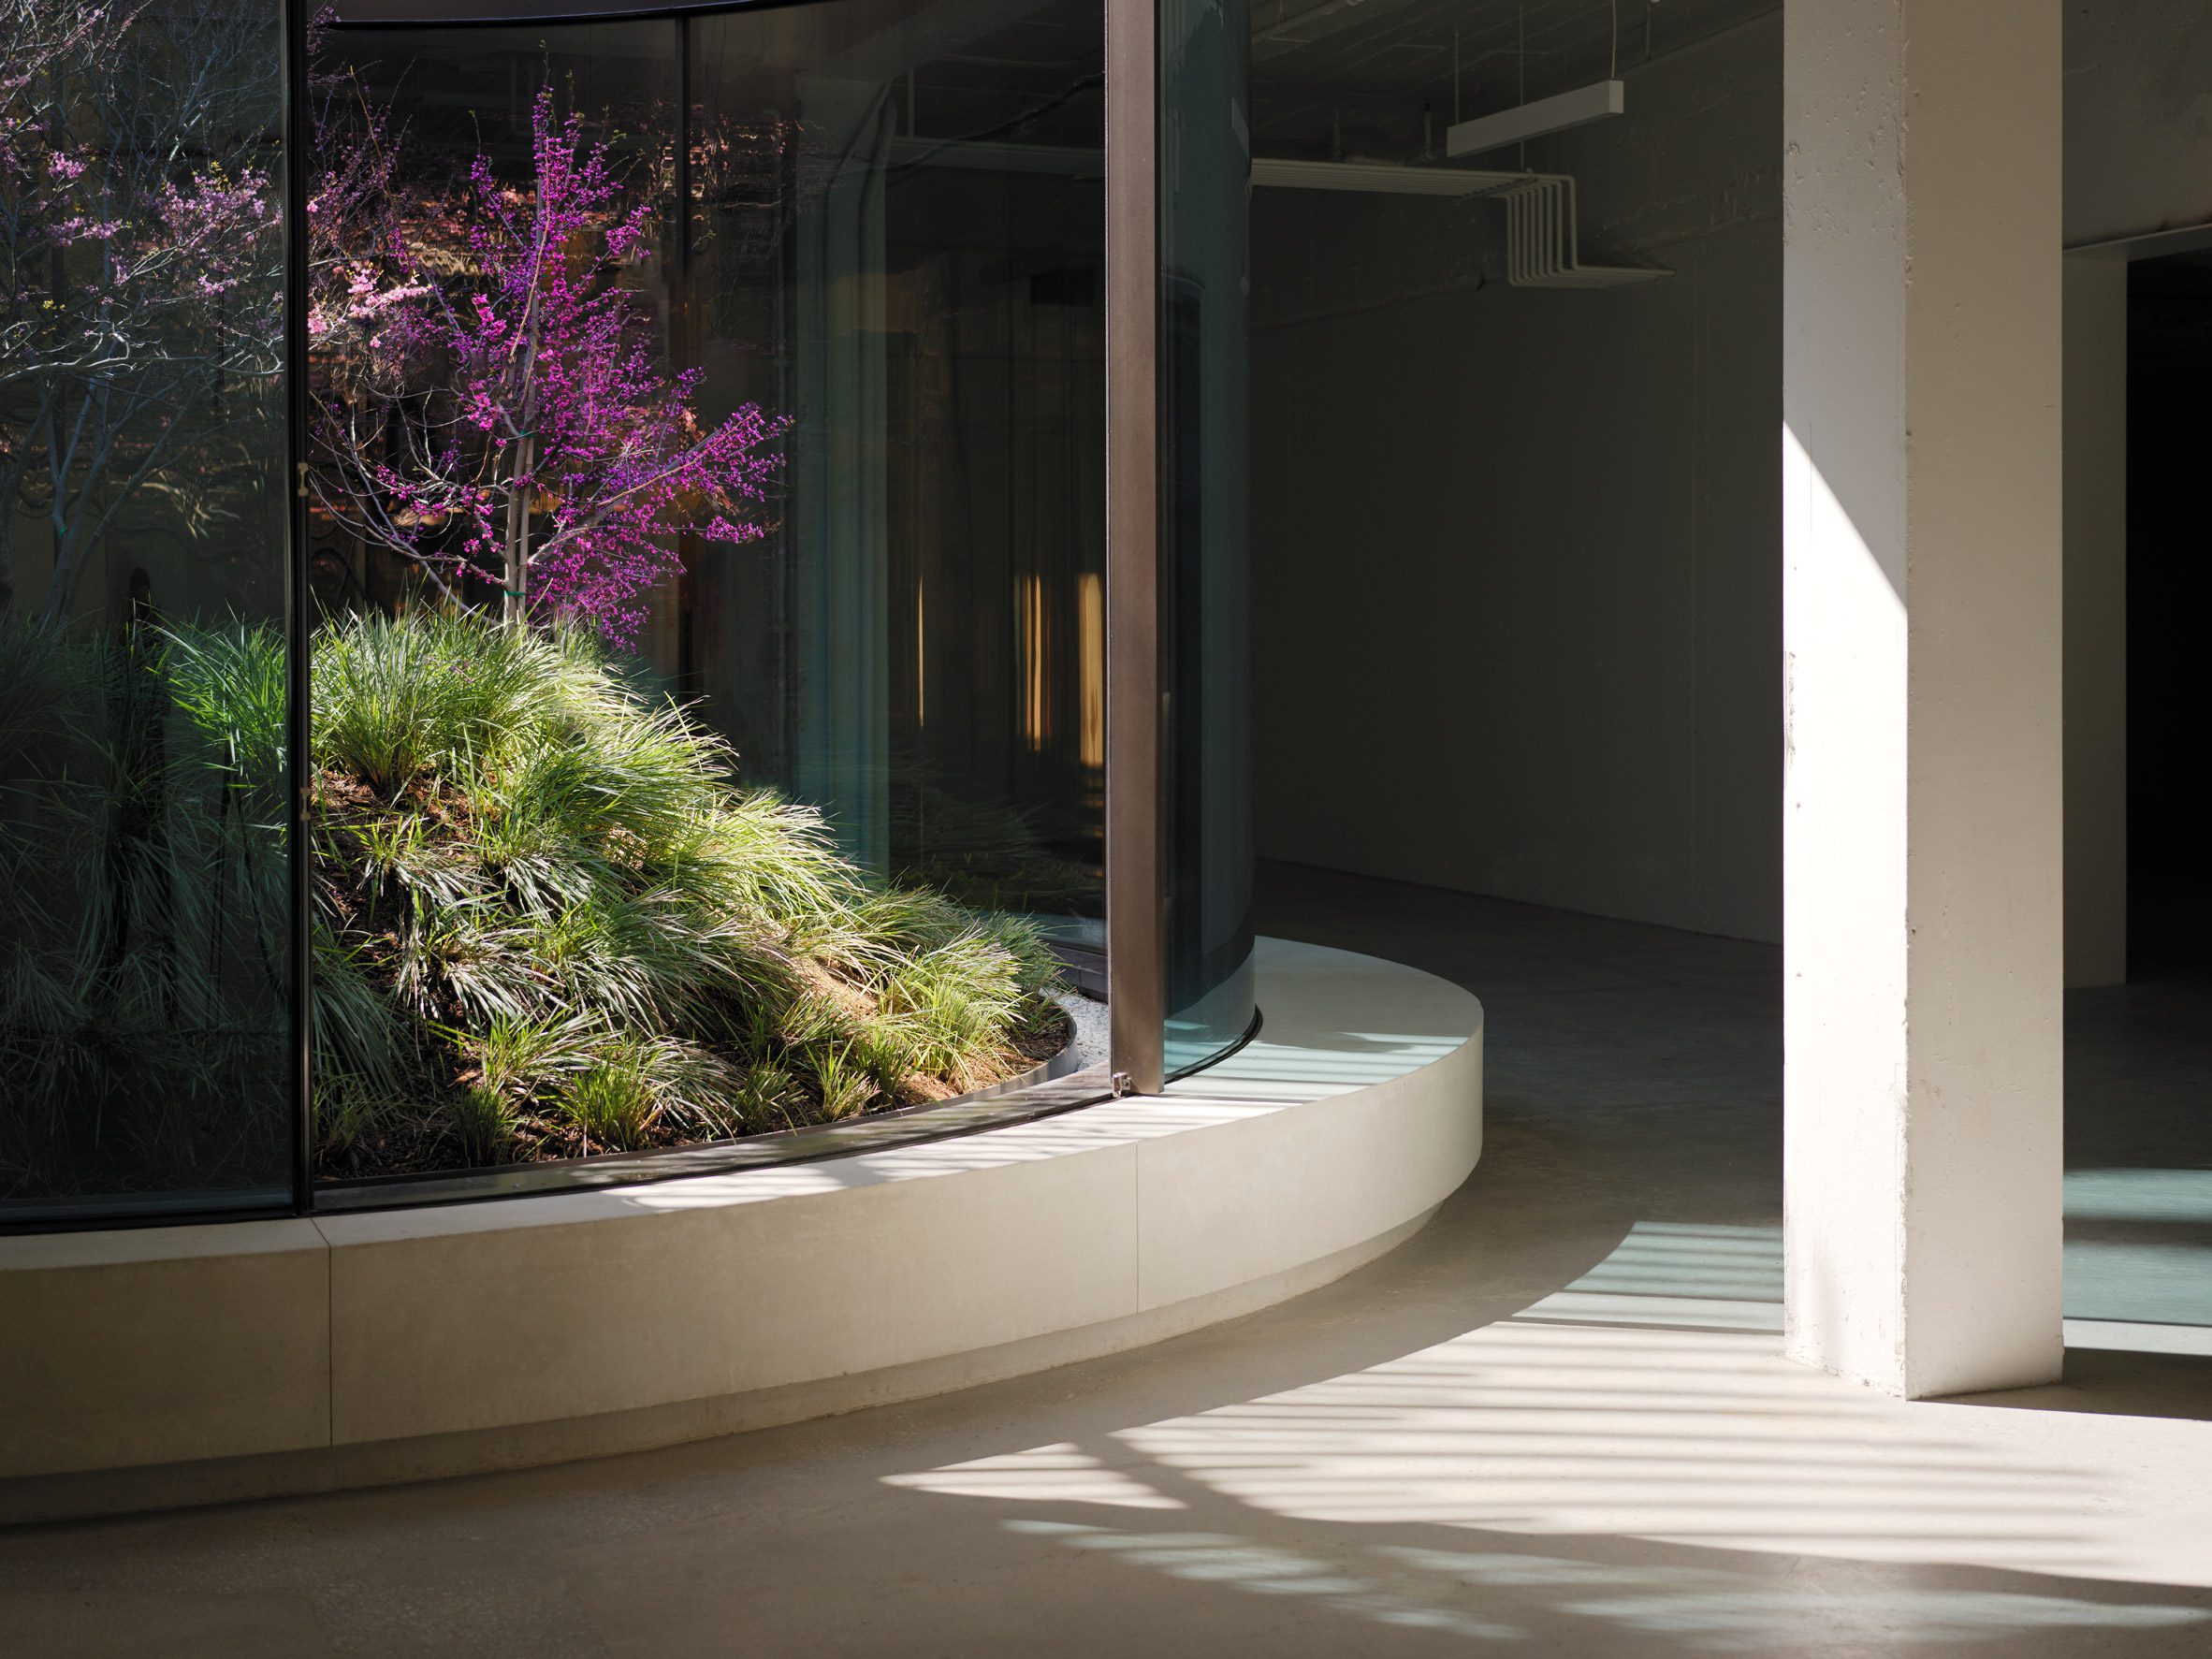 A light well with a sunken garden of trees and grasses